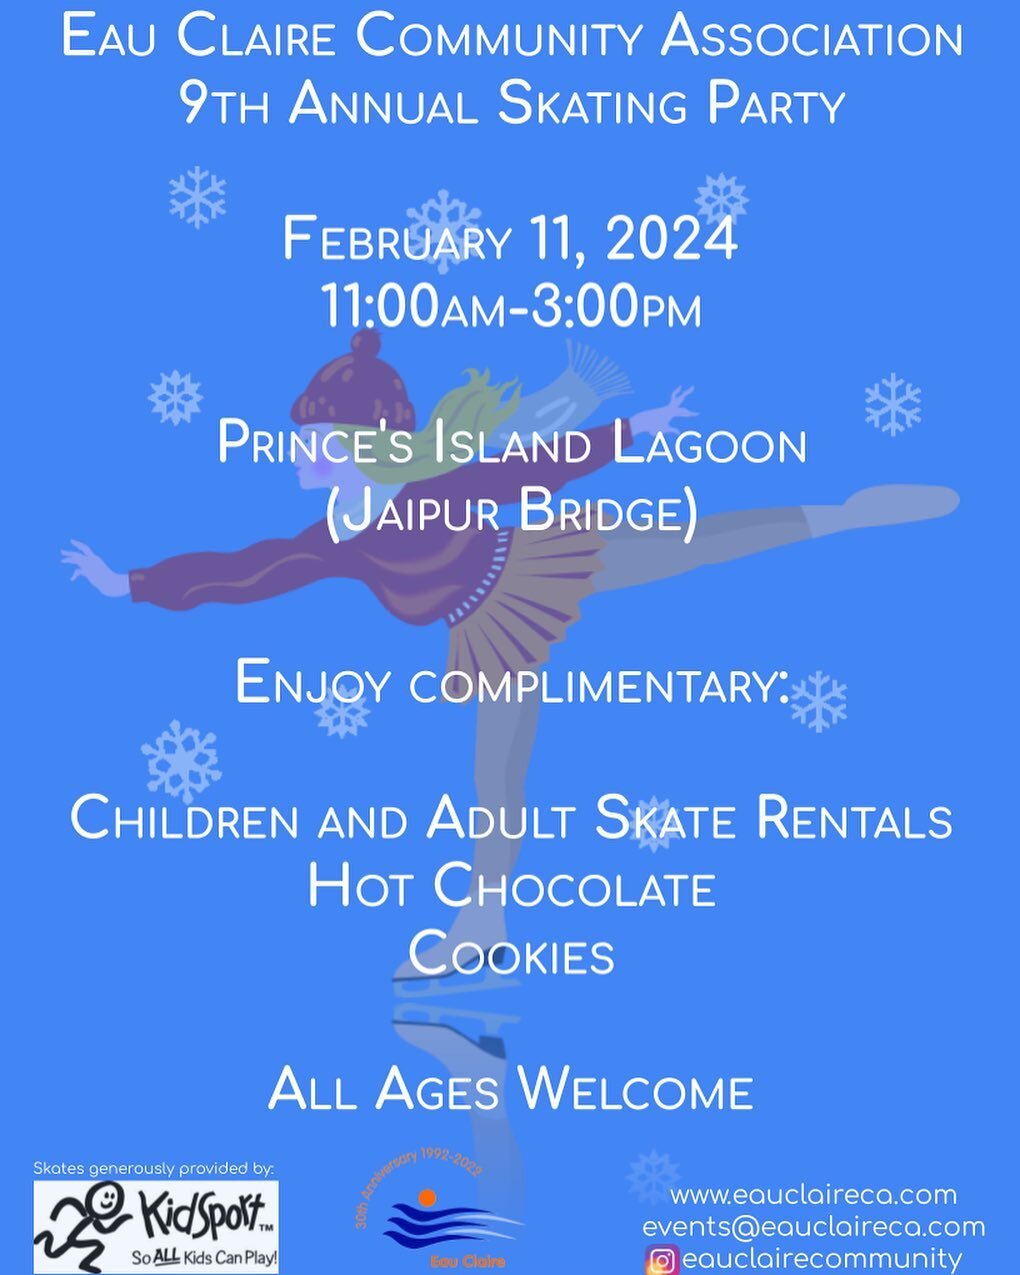 Please join us for our 9th annual skating party! It&rsquo;ll be loads of fun with FREE skate and helmet rentals. All ages are welcome!

Sunday, February 11th 2024
11:00am-3:00pm
Prince&rsquo;s Island Lagoon (Jaipur Bridge)

See you there!
.
.
.
.
.
.